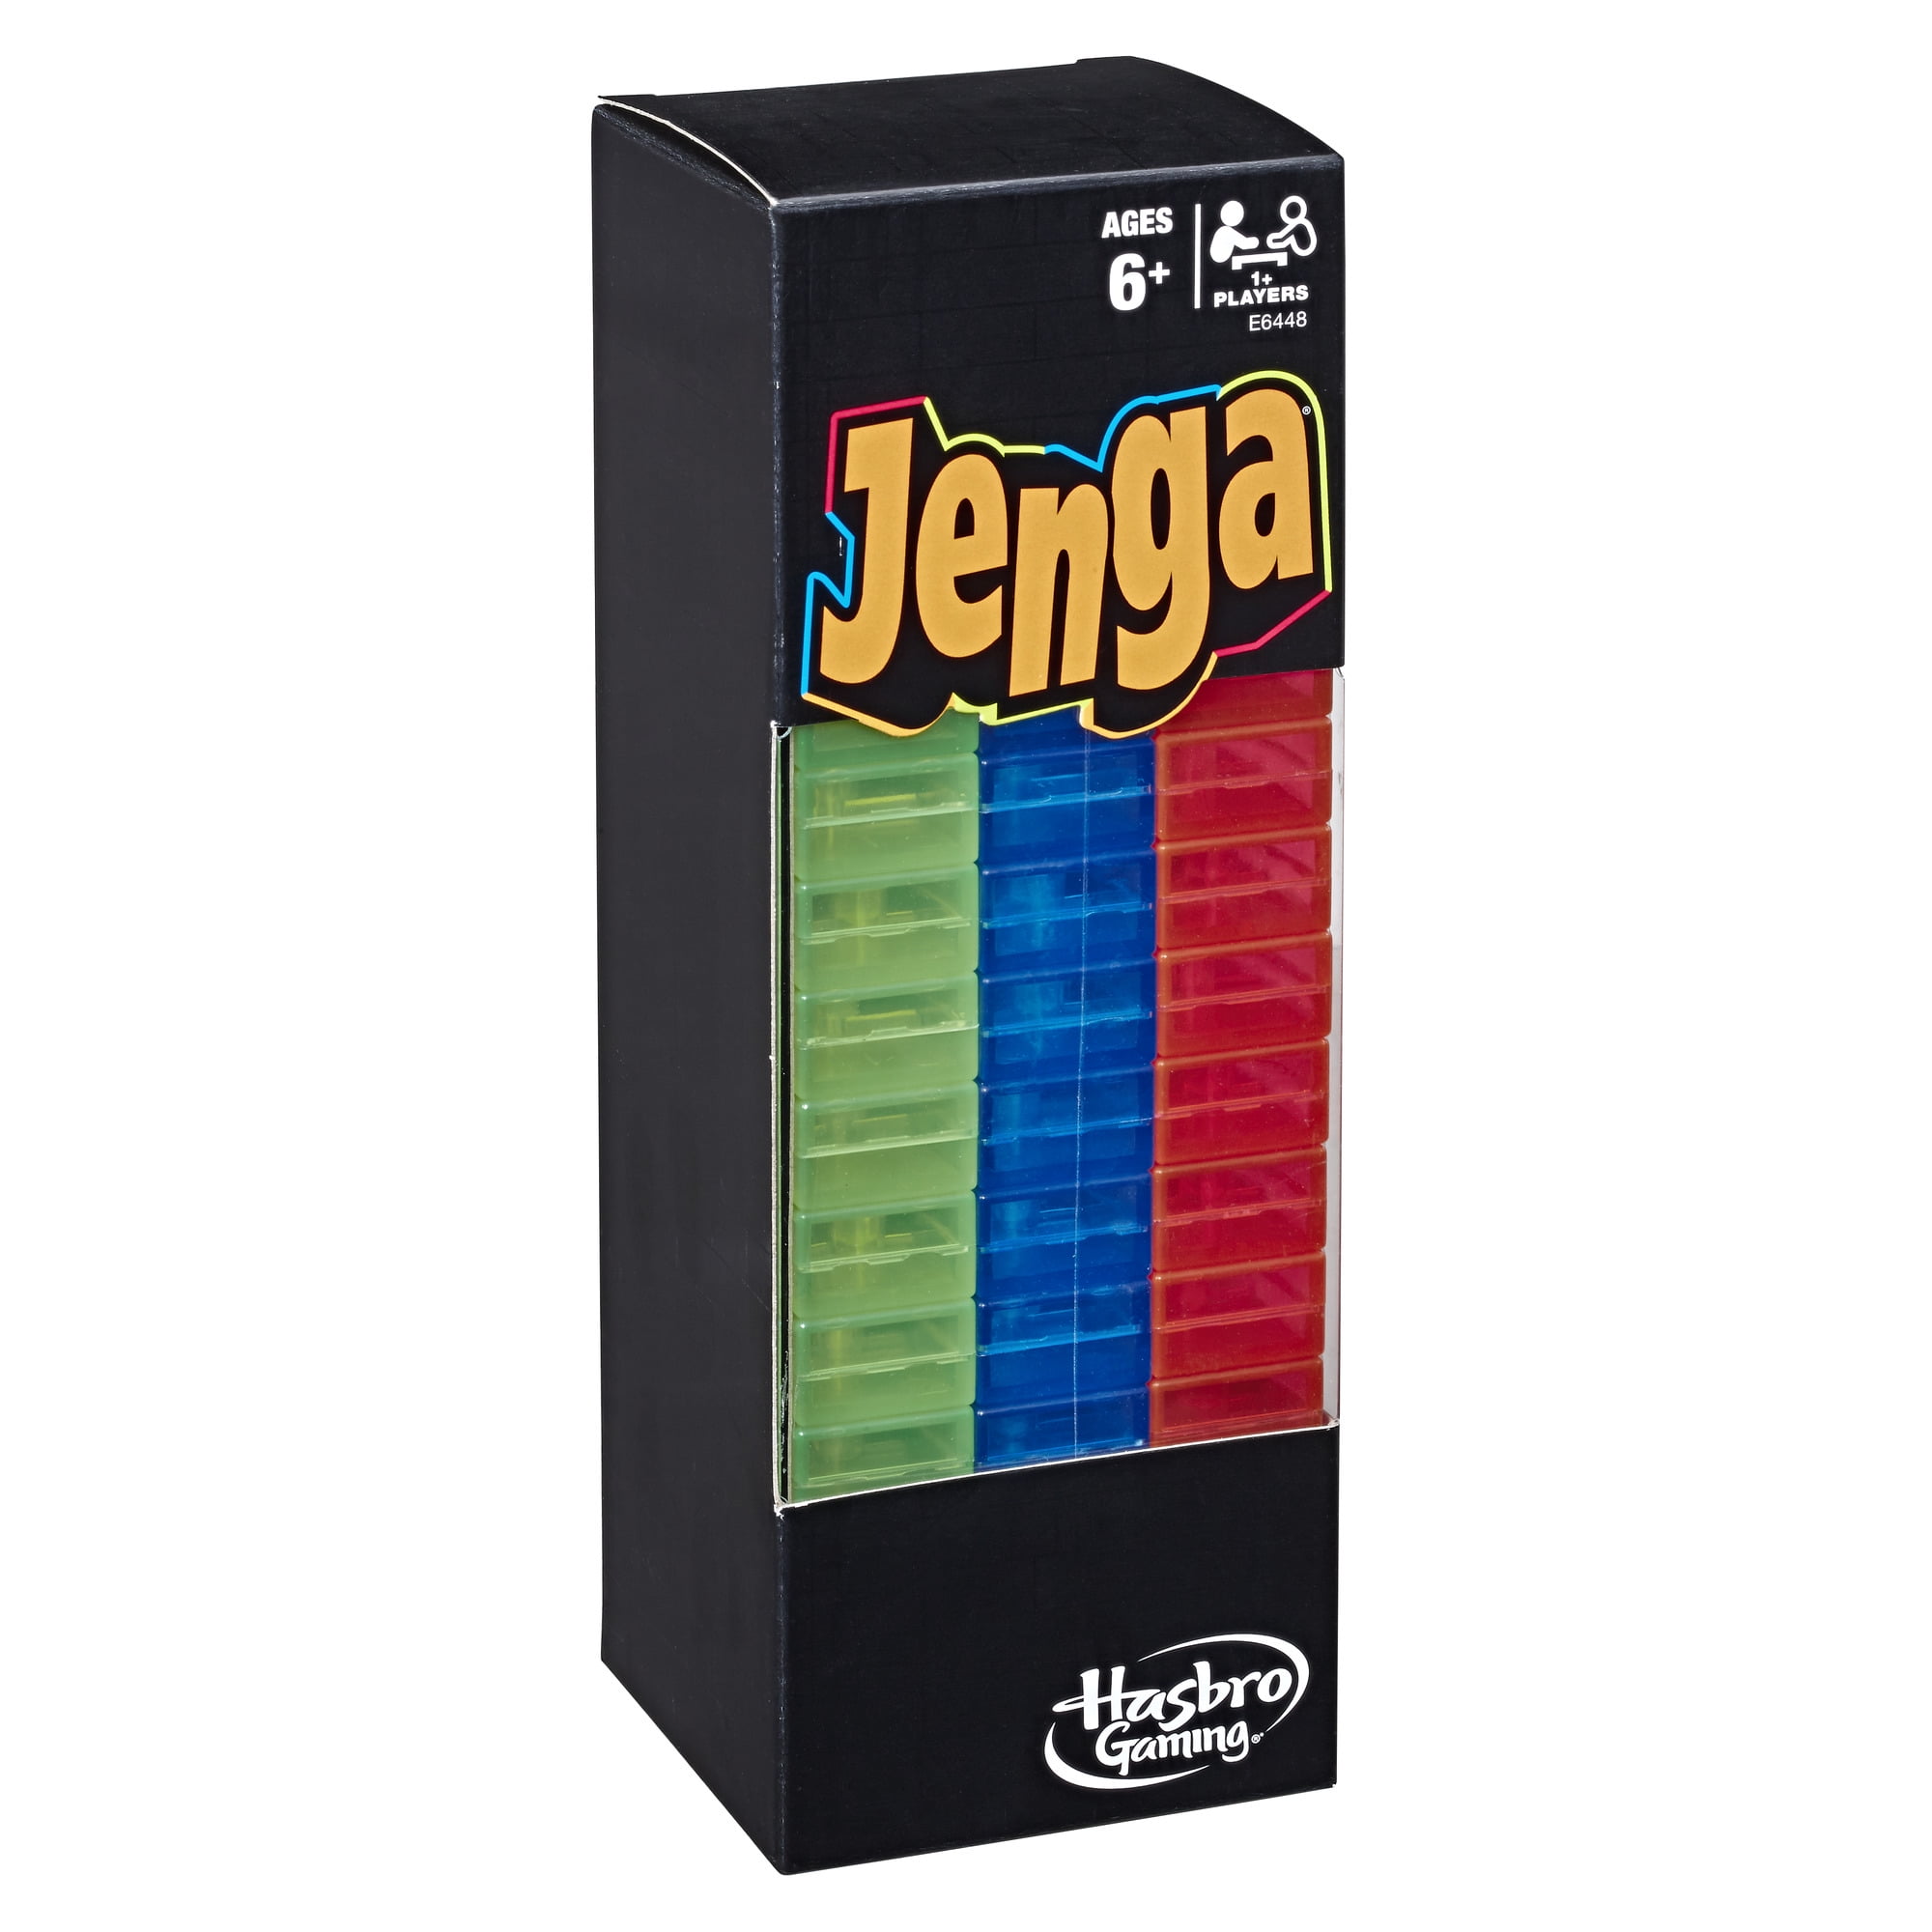 Jenga Classic Game By Hasbro Stacking Wooden Tower Block Game